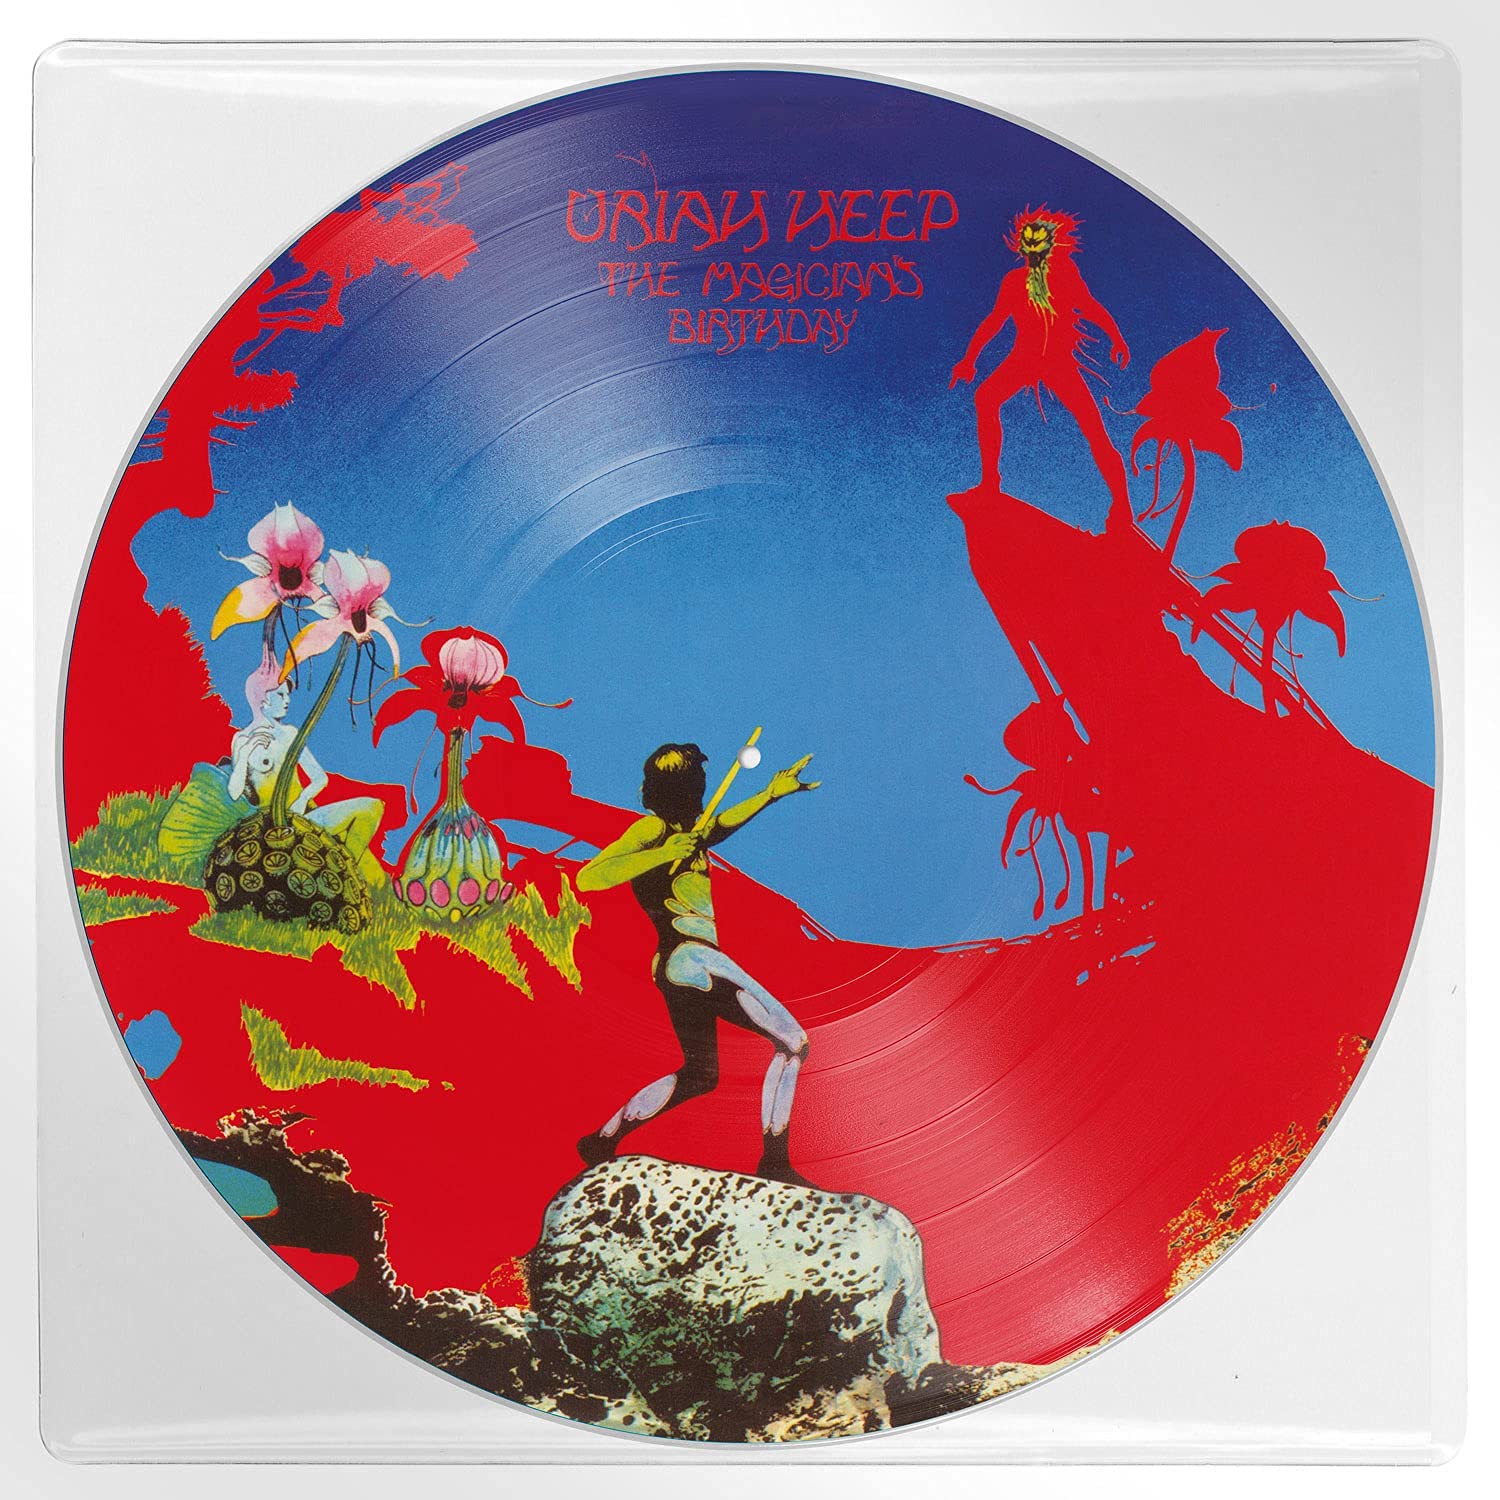 URIAH HEEEP - The Magician’s Birthday (LP Picture Disc #5)